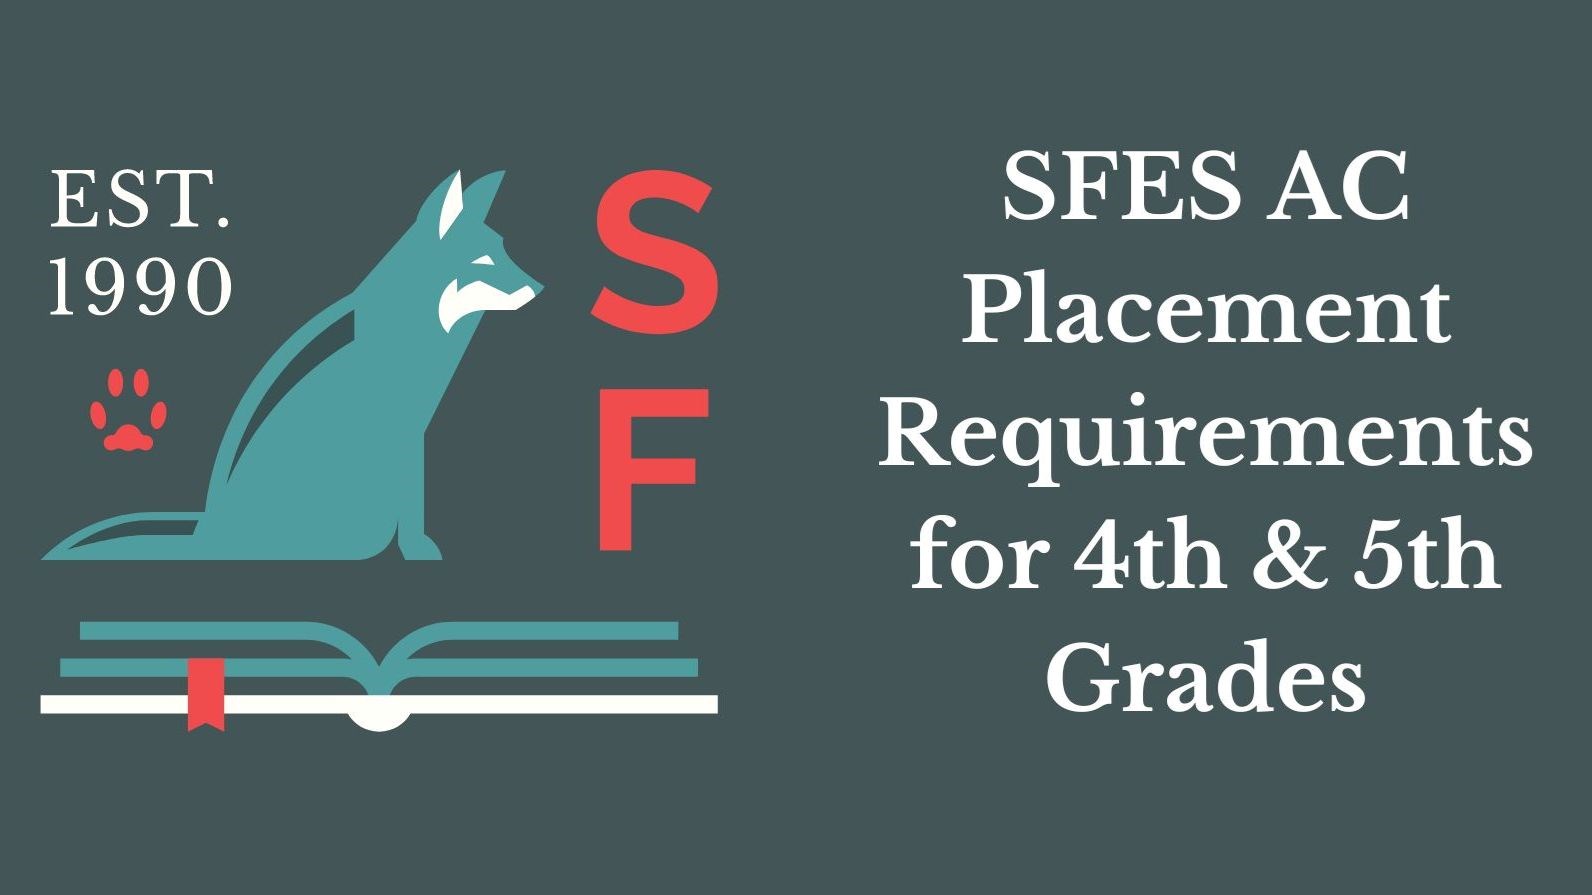 SFES AC Placement Requirements for 4th and 5th grades